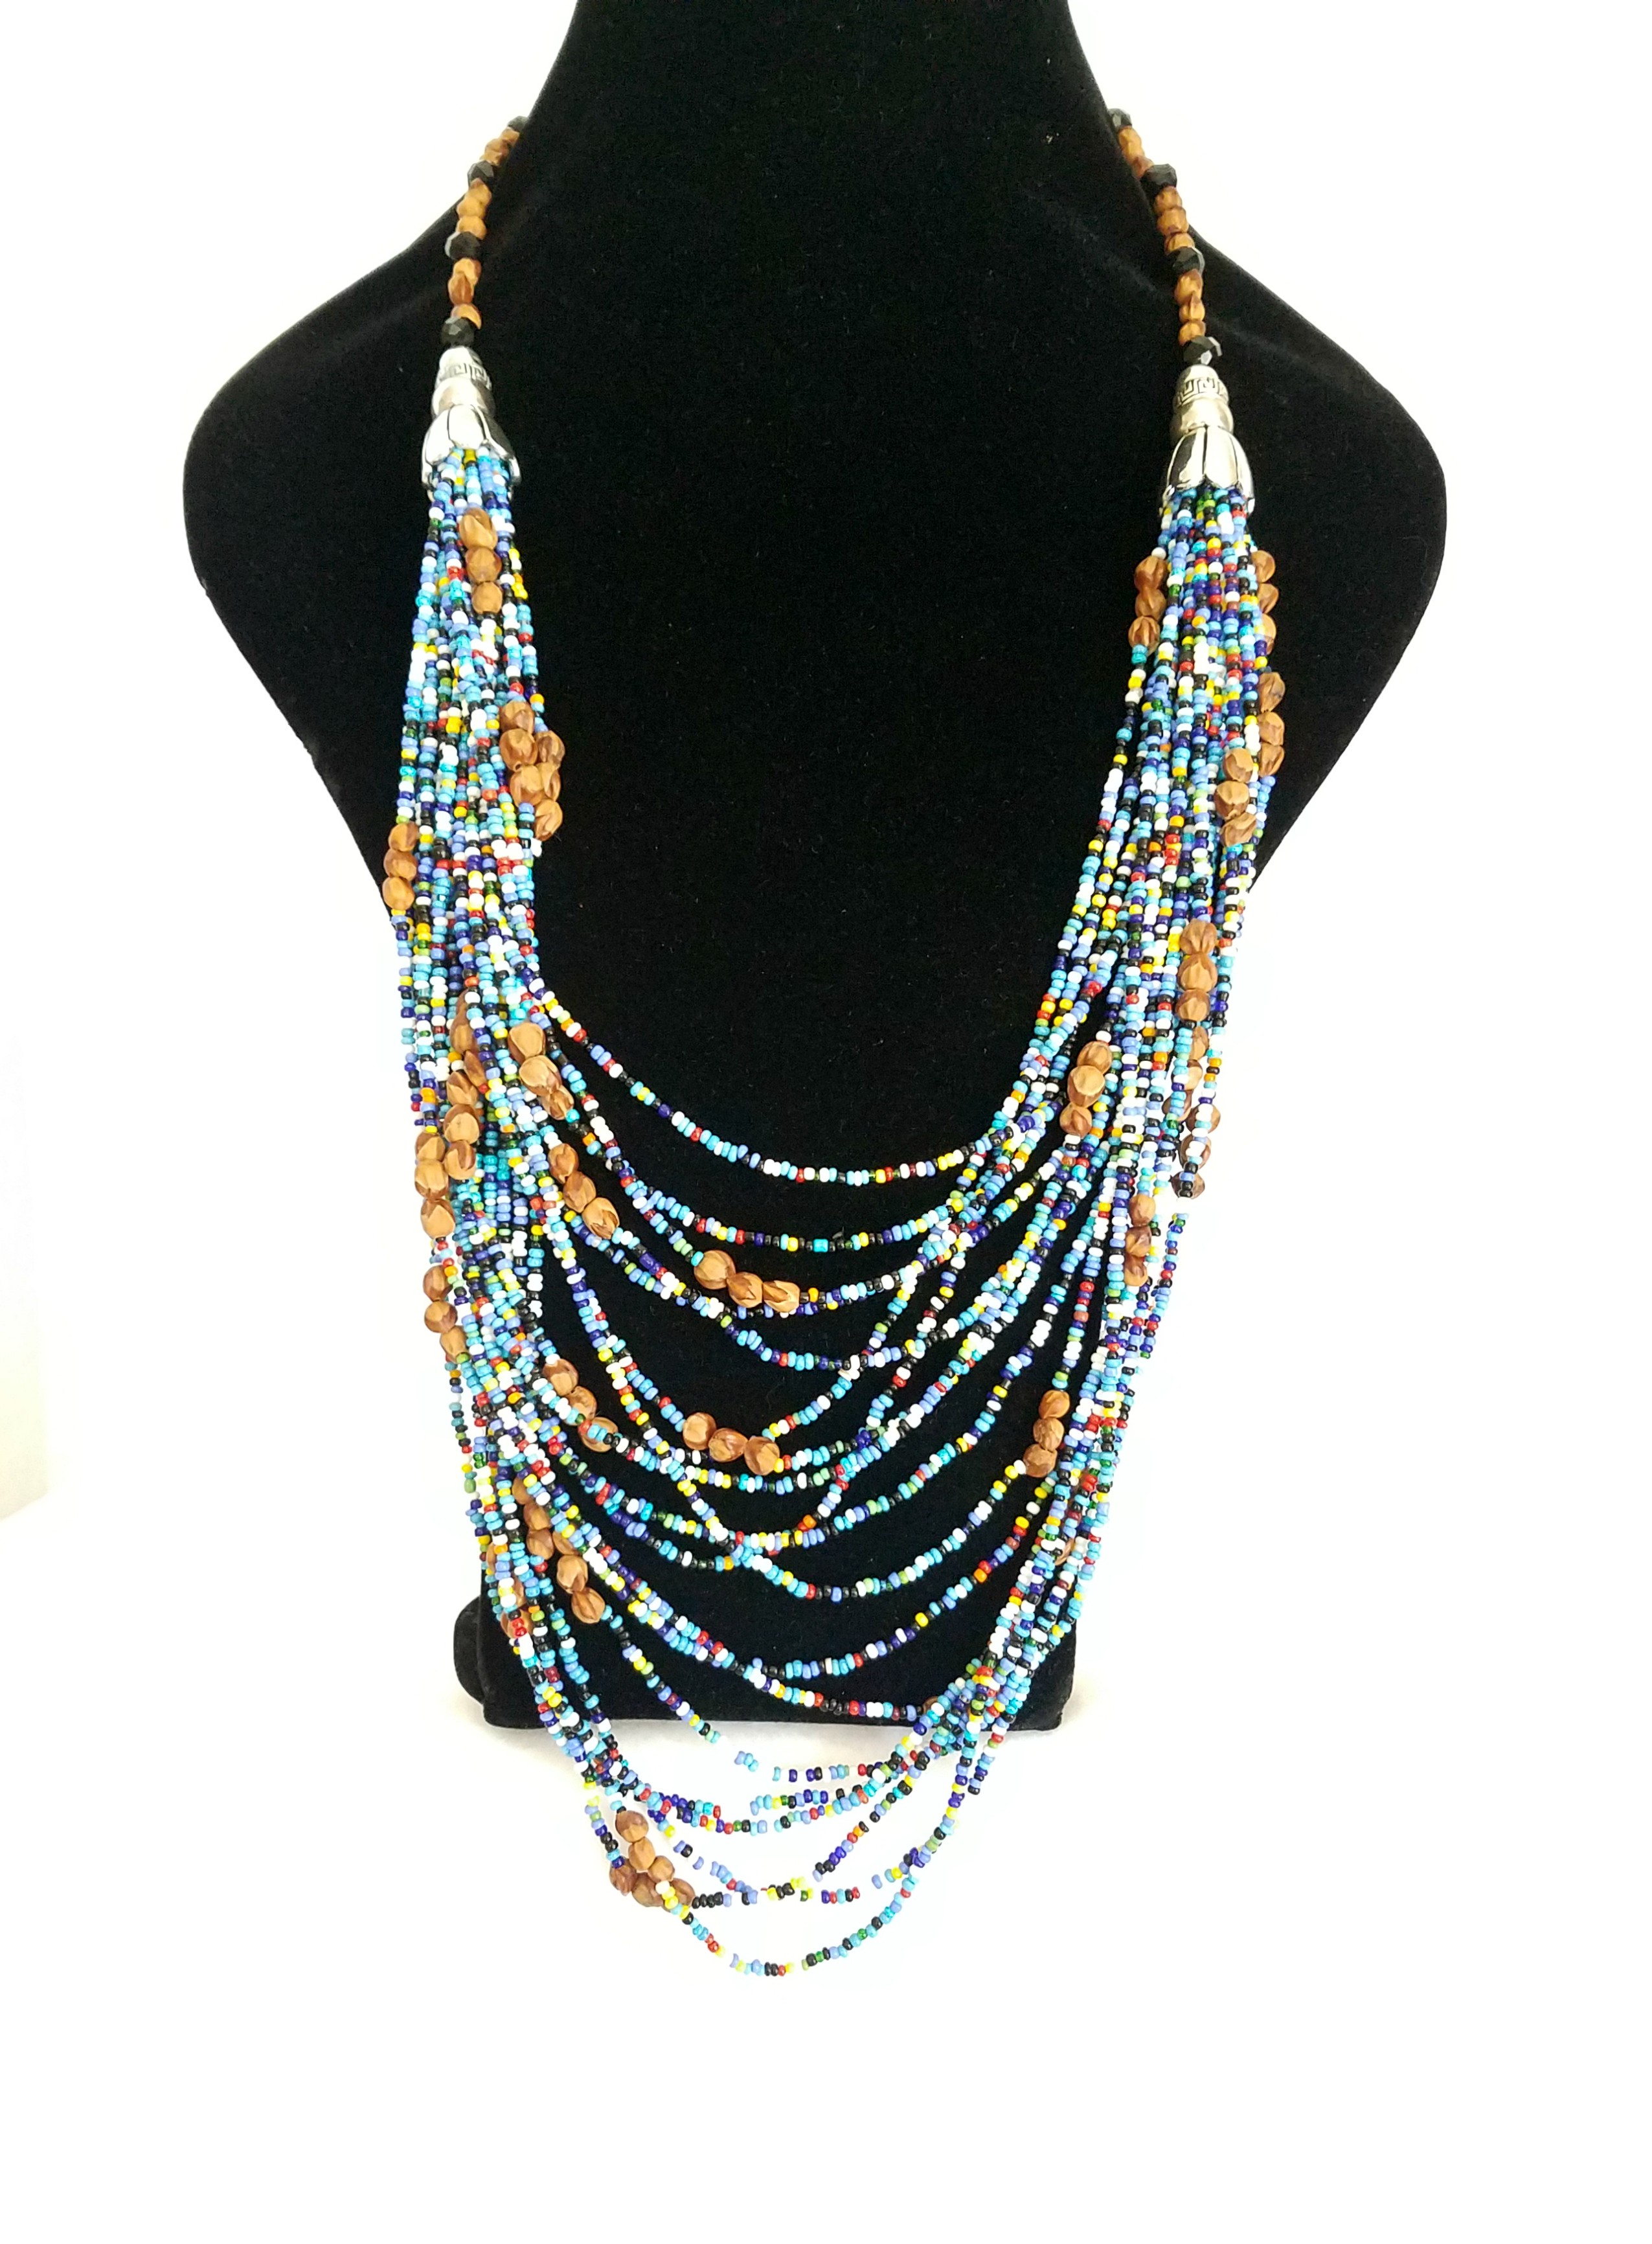 Colorful Multi Strand Ghost Bead Necklace